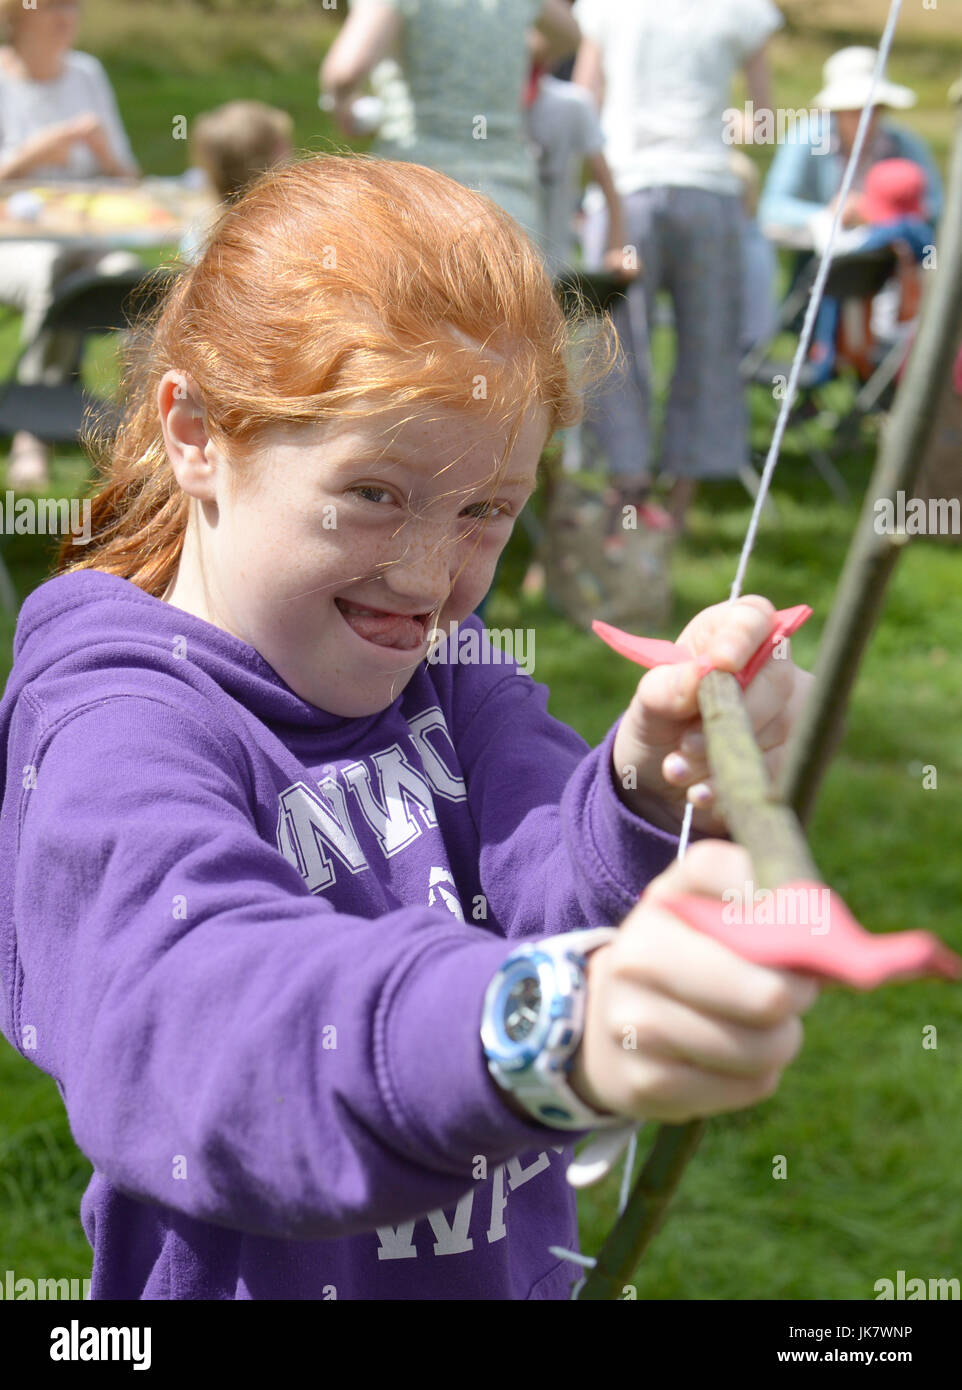 girl with red hair plays with home-made bow and arrow Stock Photo